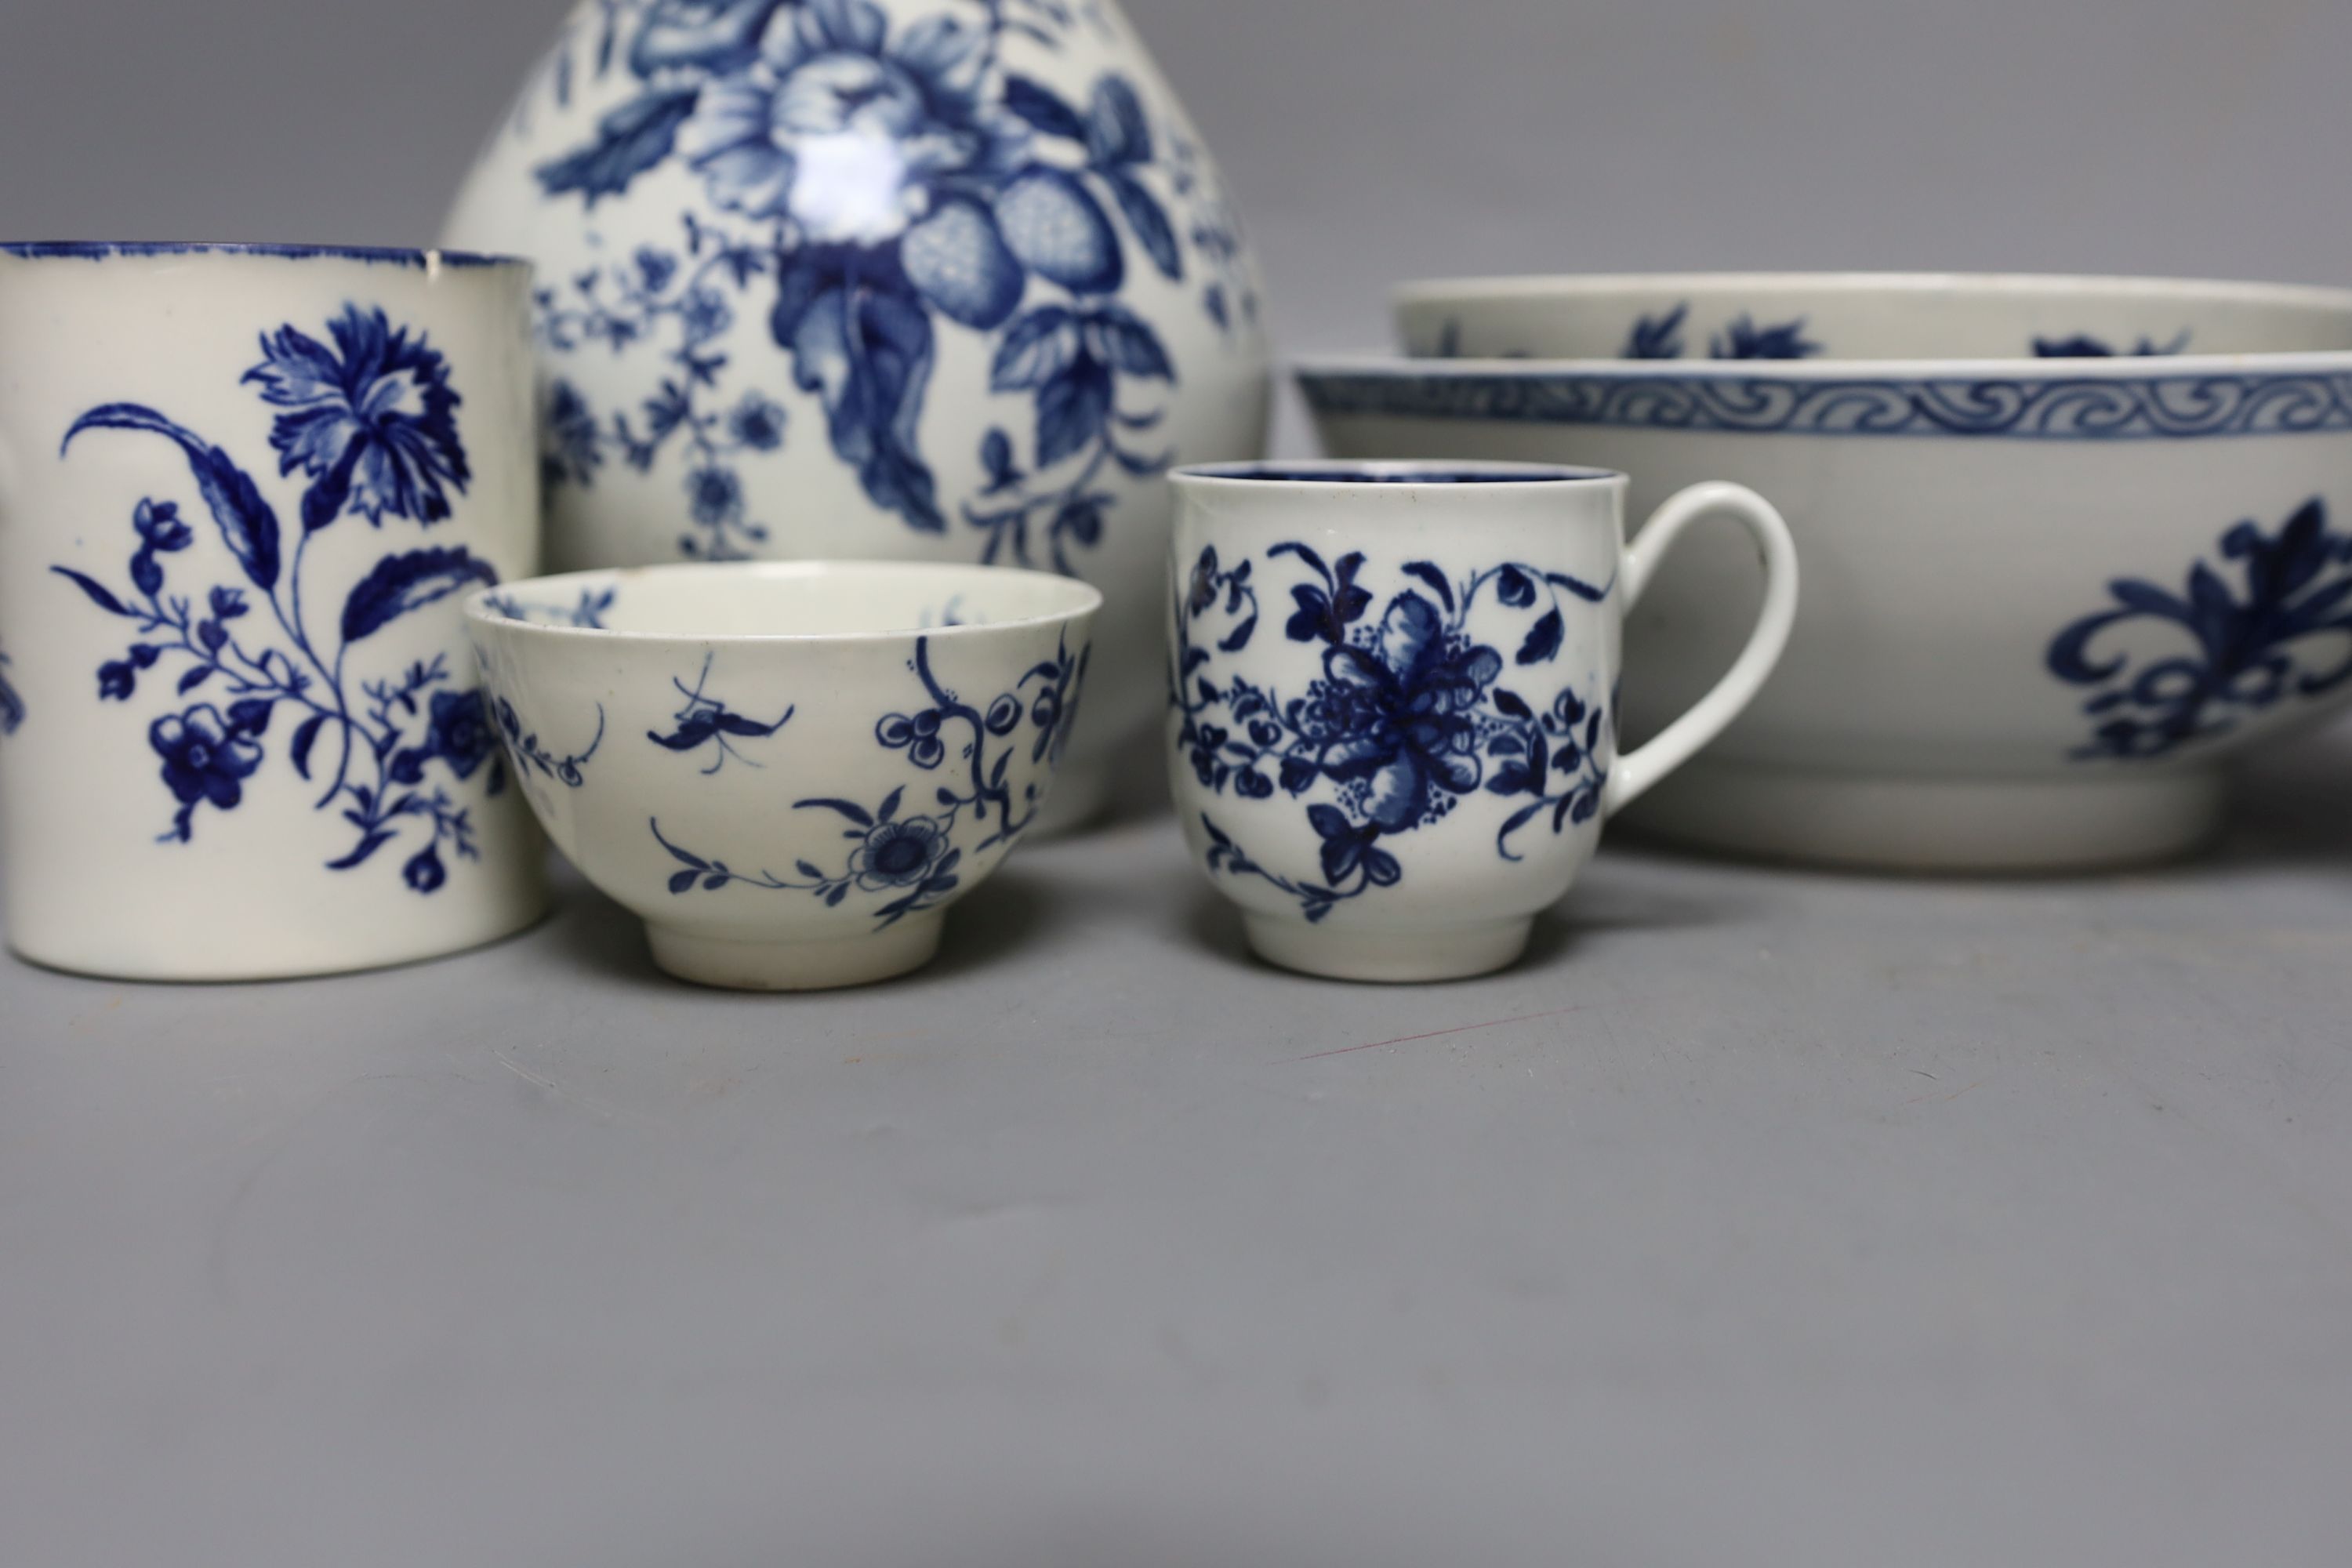 A Chaffers Liverpool rare bowl, a Worcester bowl, a mug with the Gilliflower pattern, three - Image 3 of 18